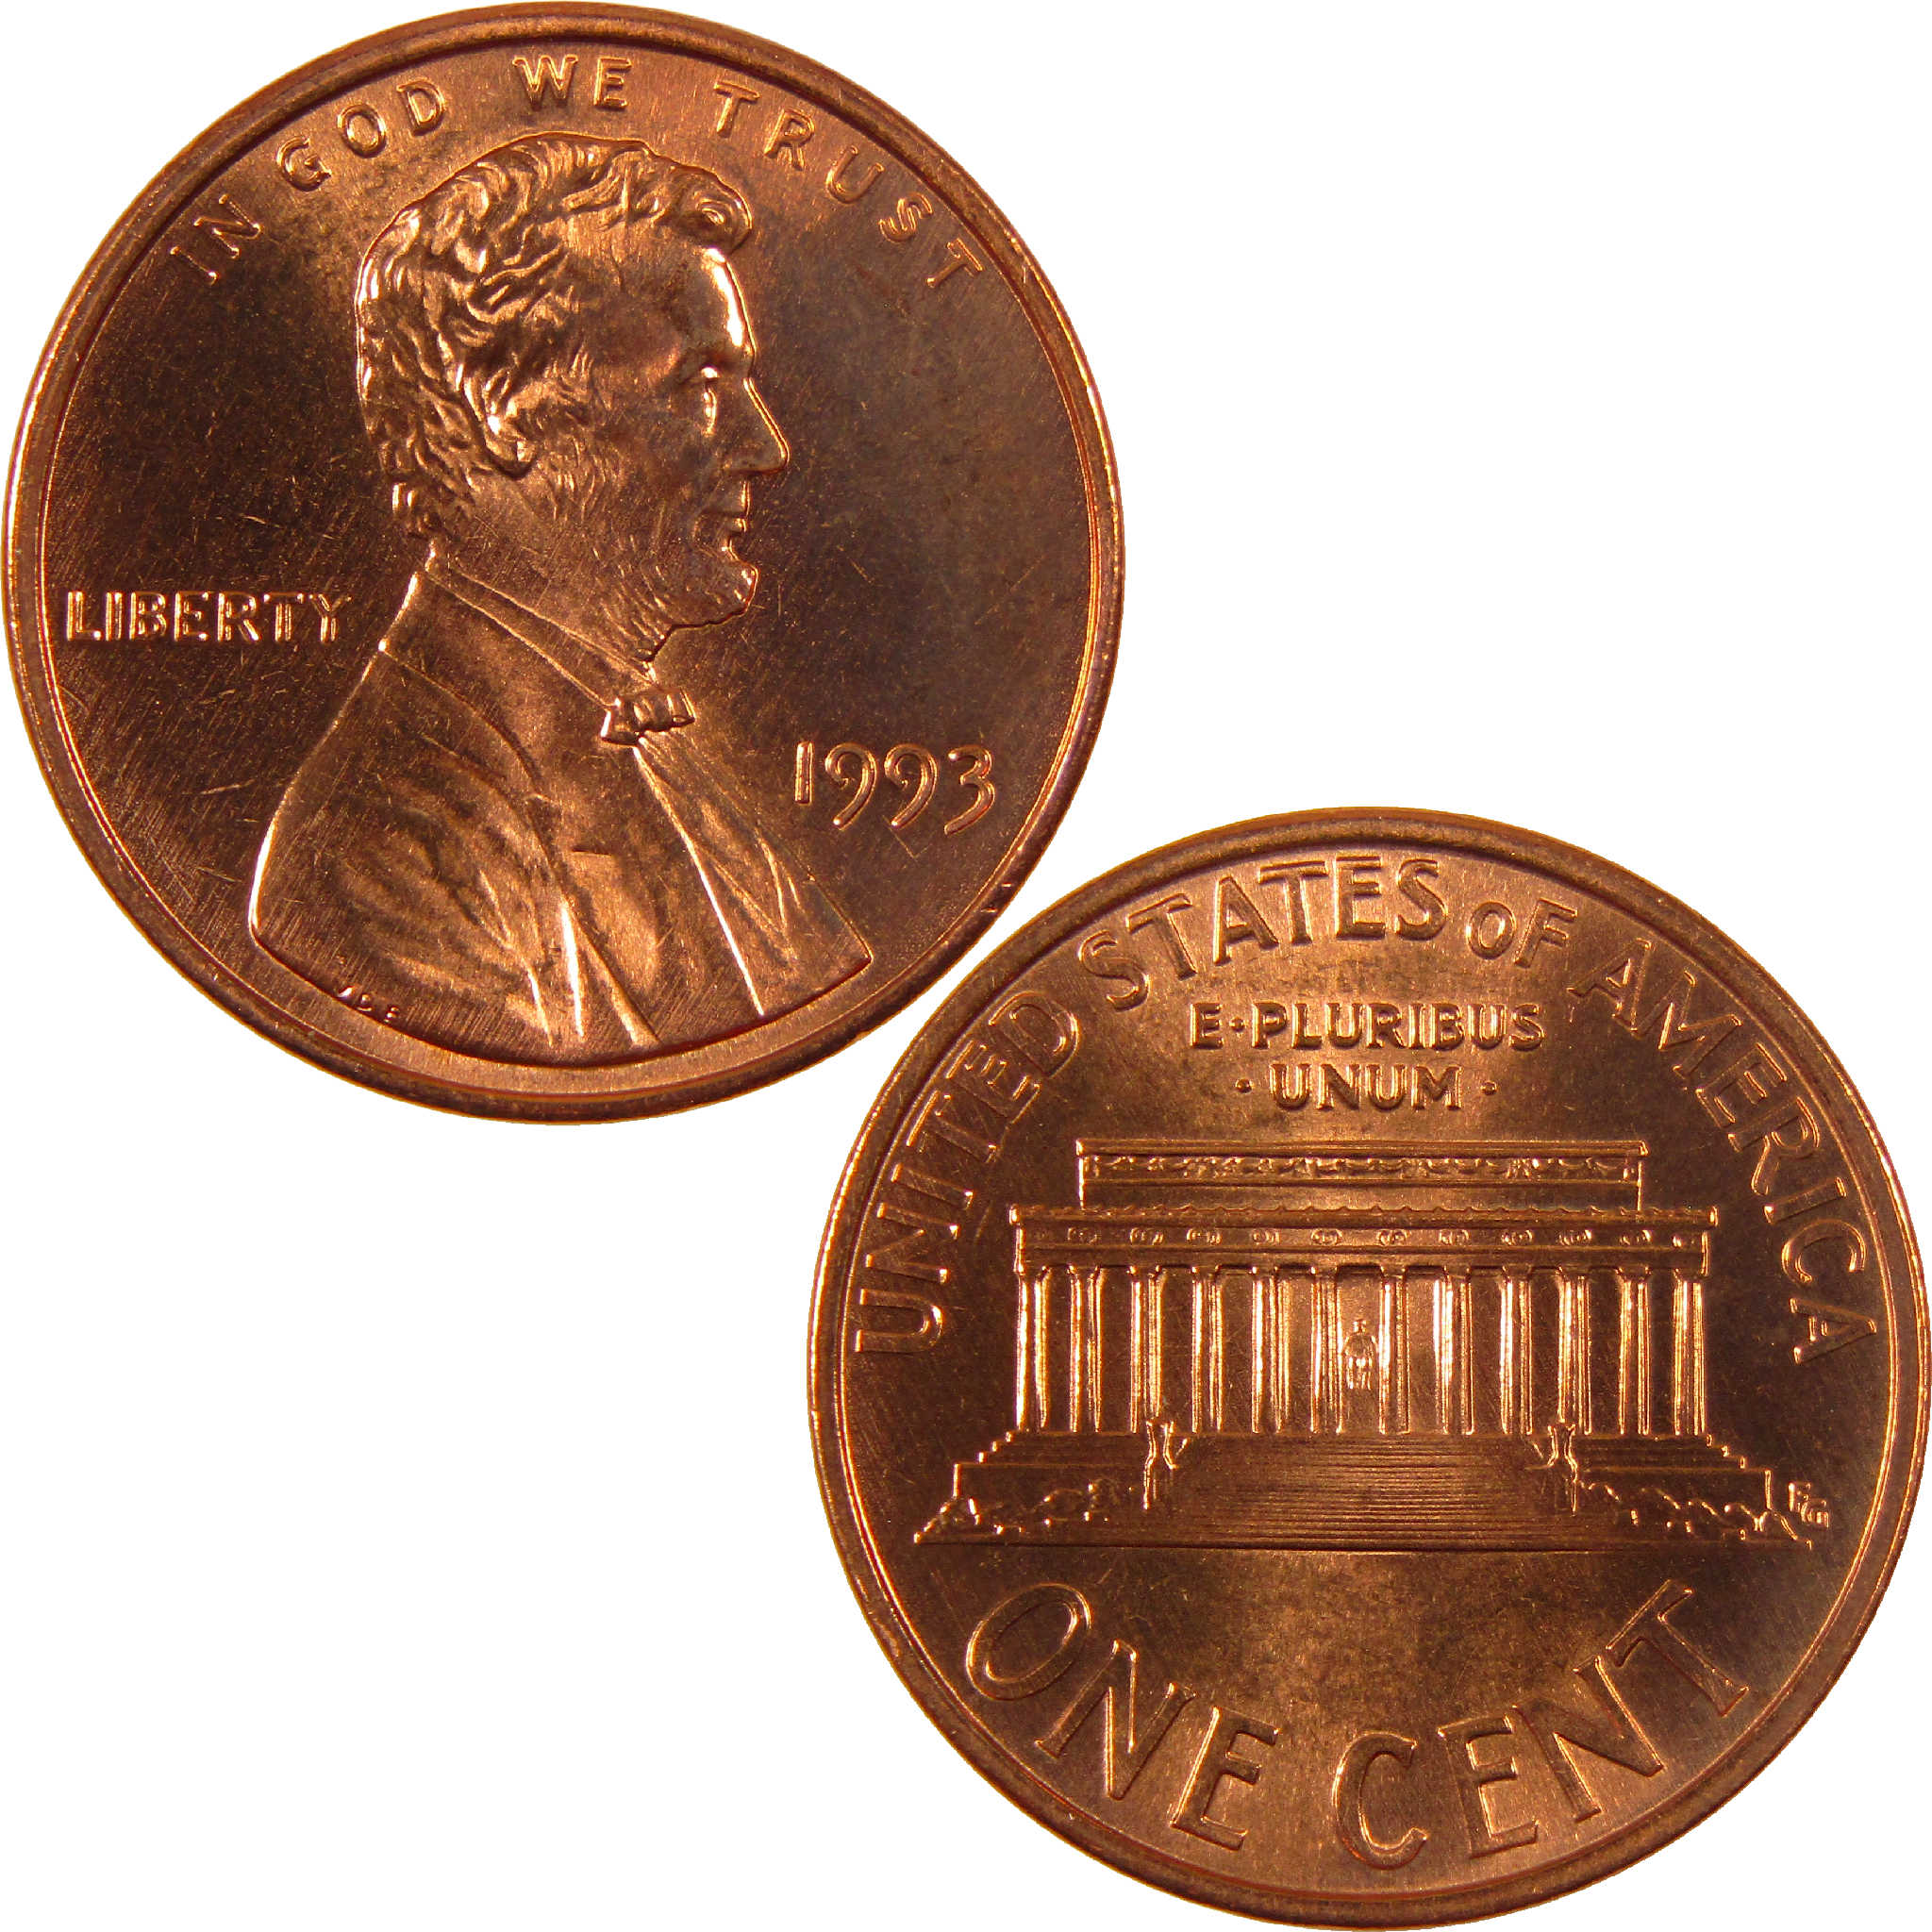 1993 Lincoln Memorial Cent BU Uncirculated Penny 1c Coin